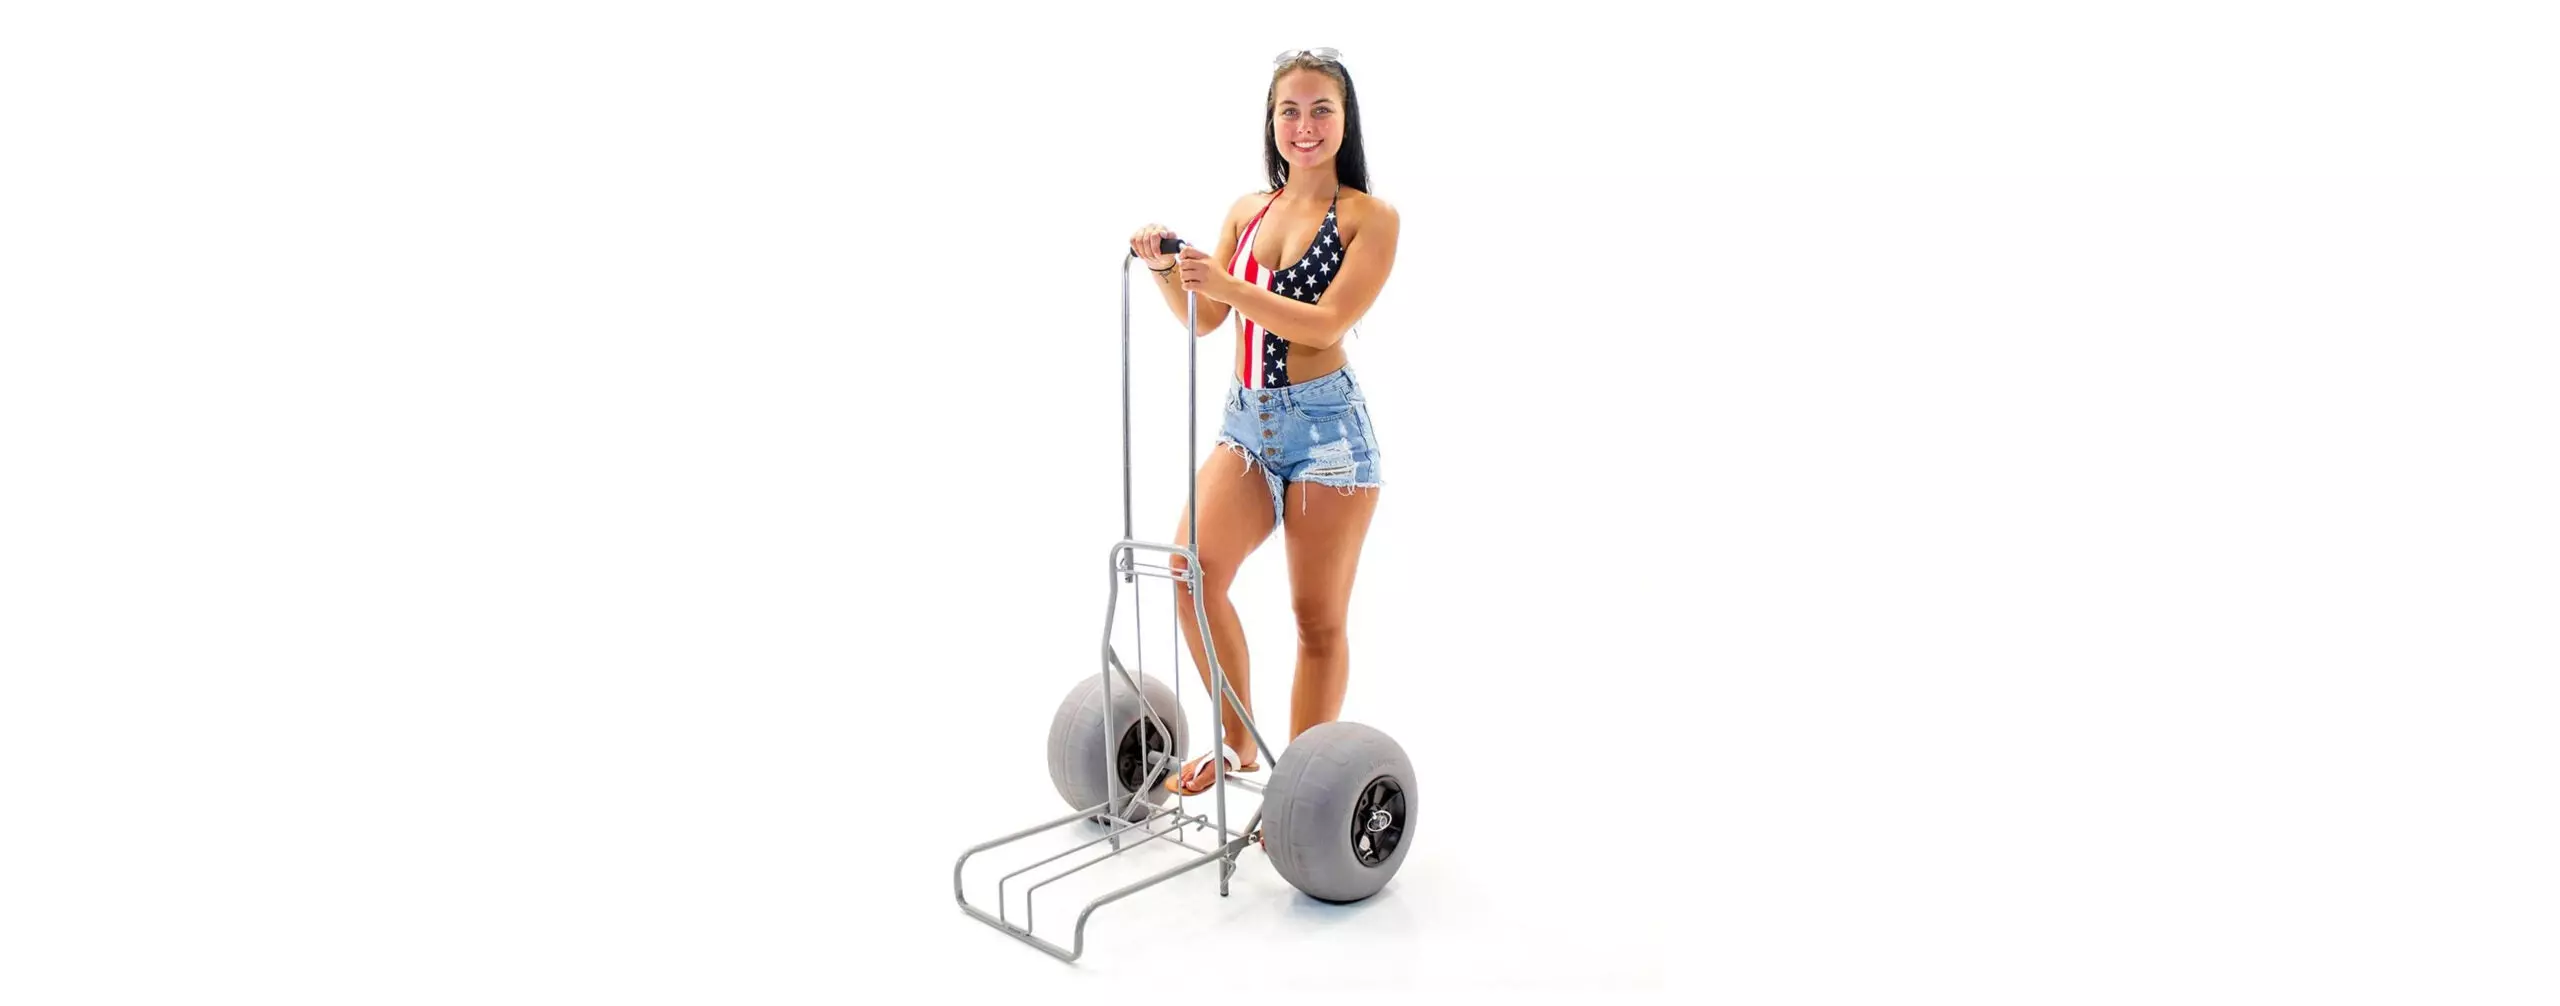 The Best Beach Carts (Review & Buying Guide) in 2022